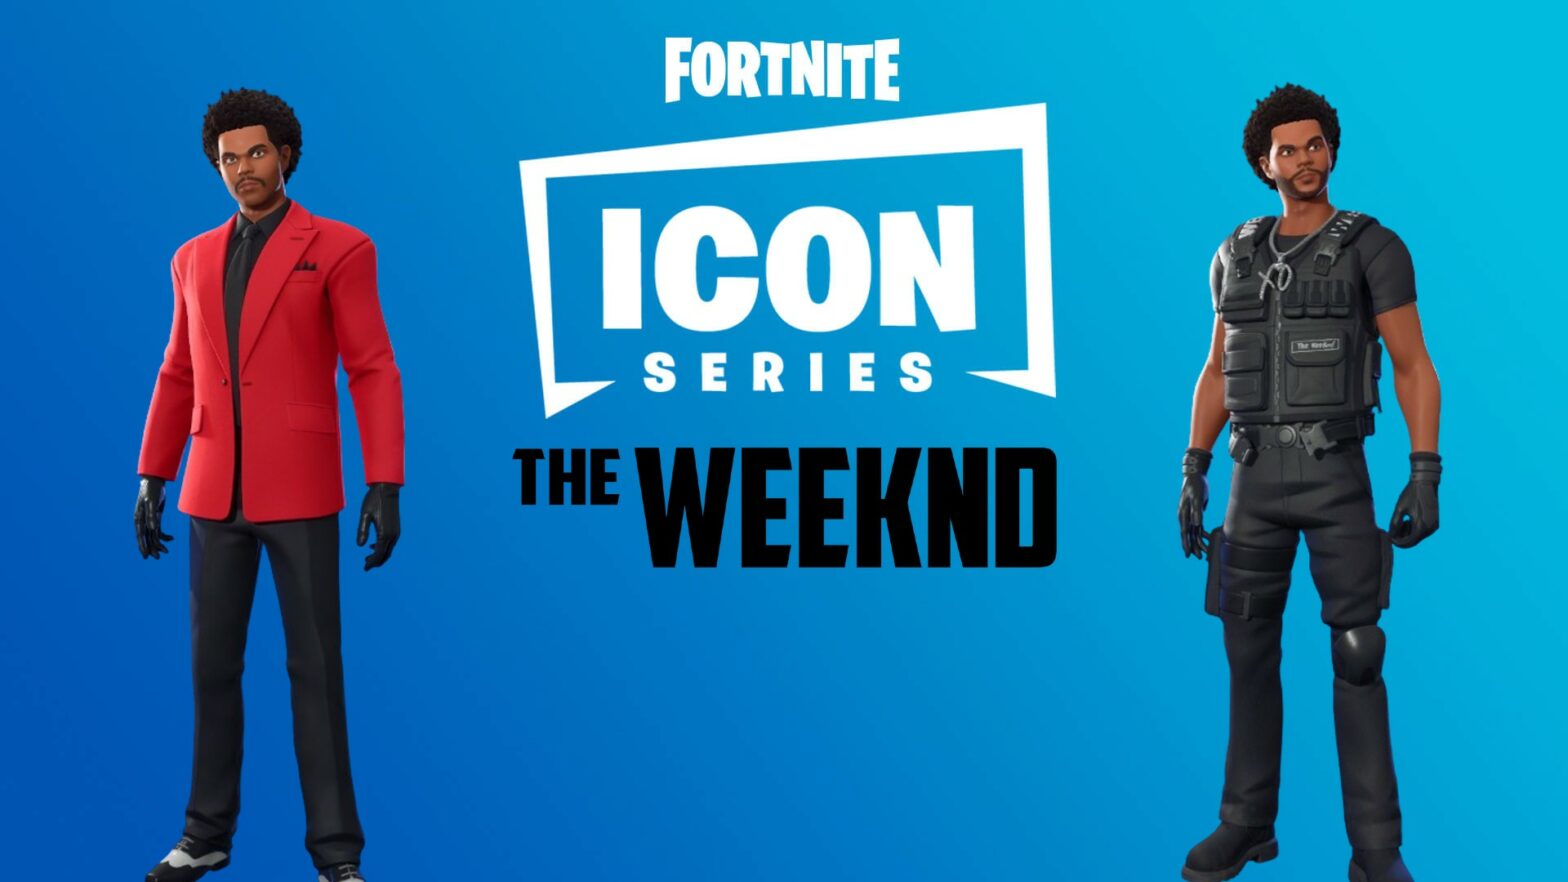 The Weeknd Fortnite skin: Release date and what's included